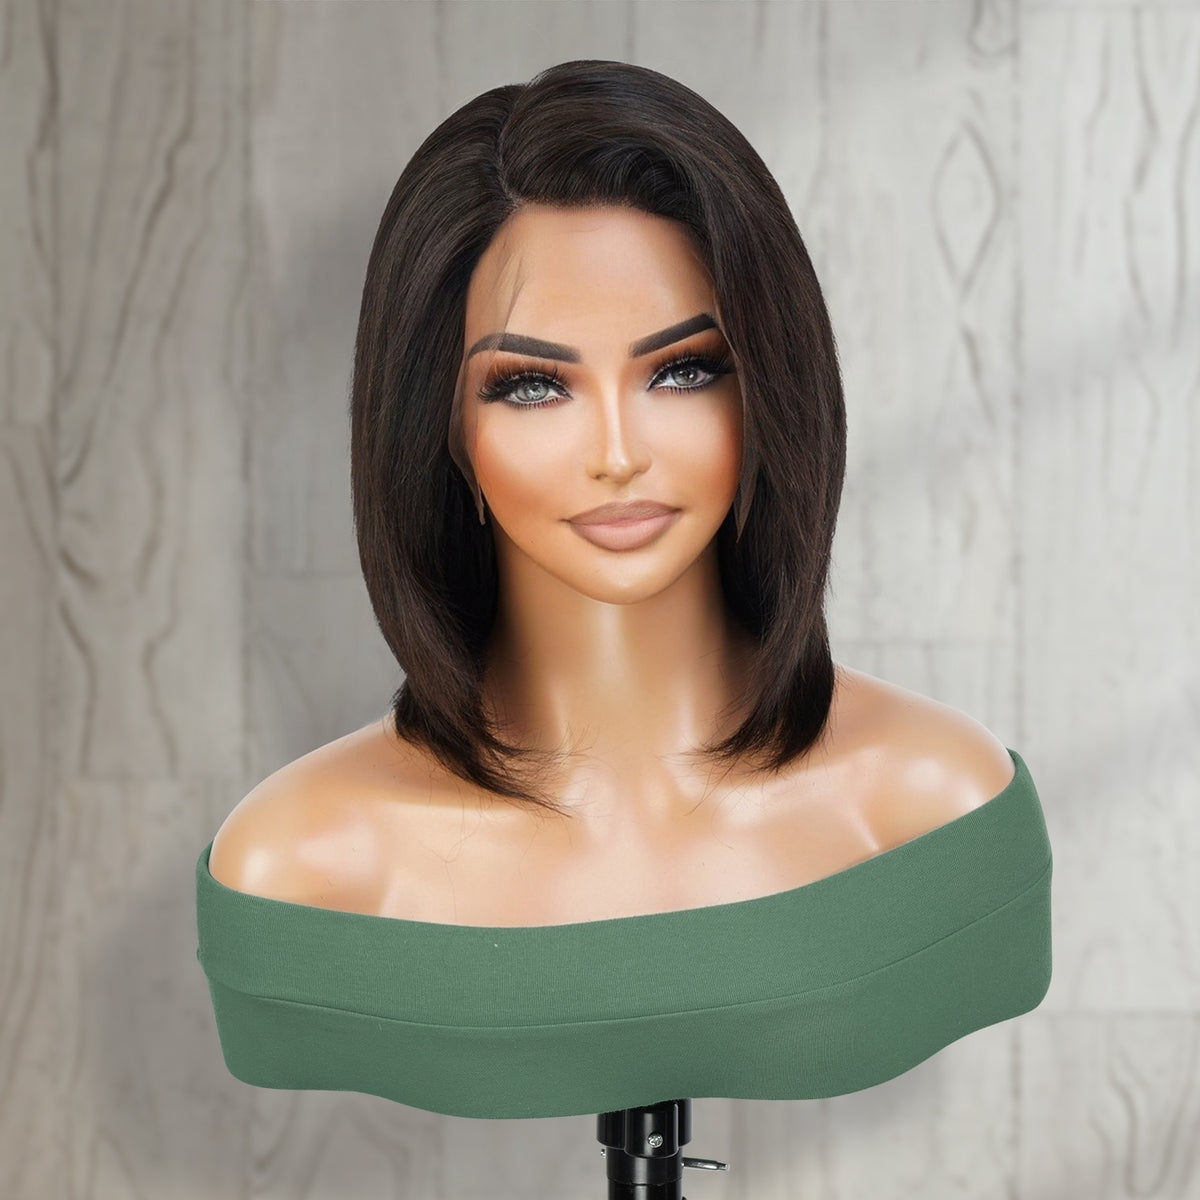 100% Virgin Remi Human Hair Hand Made Full Lace Wig Straight 8"